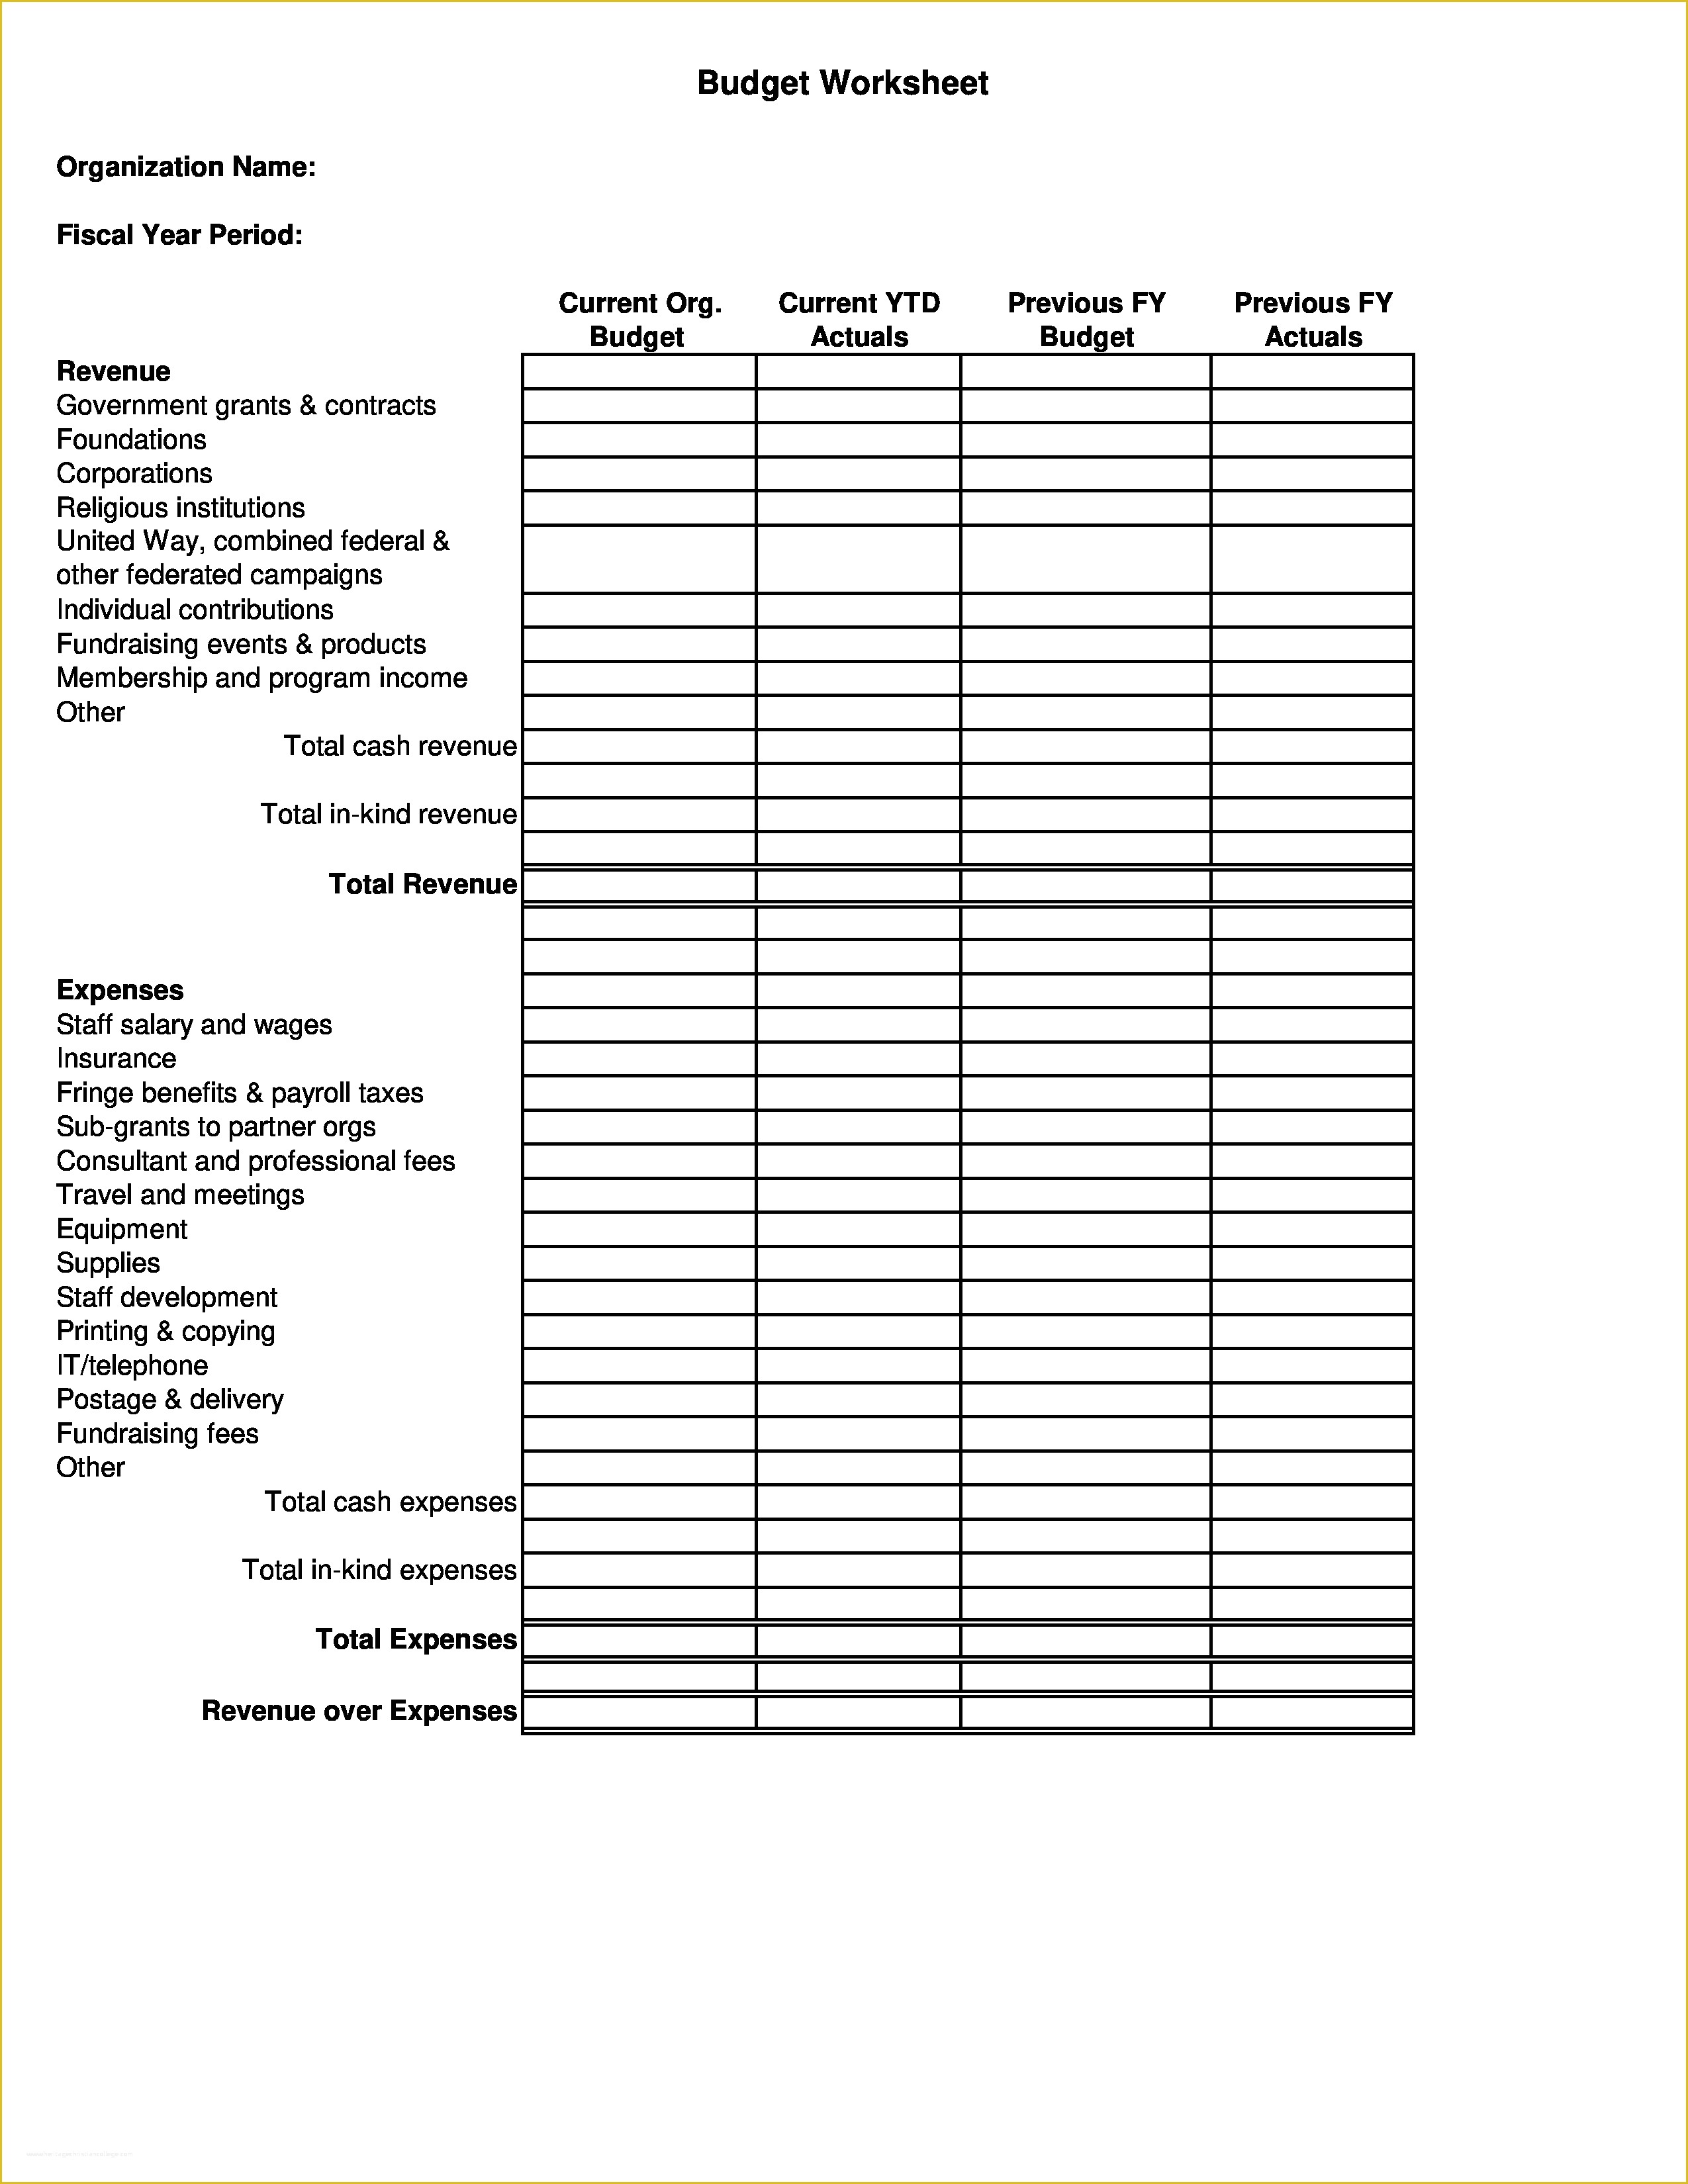 Free Budget Template for Non Profit organization Of Non Profit Excel Templates thedl event Bud Worksheet